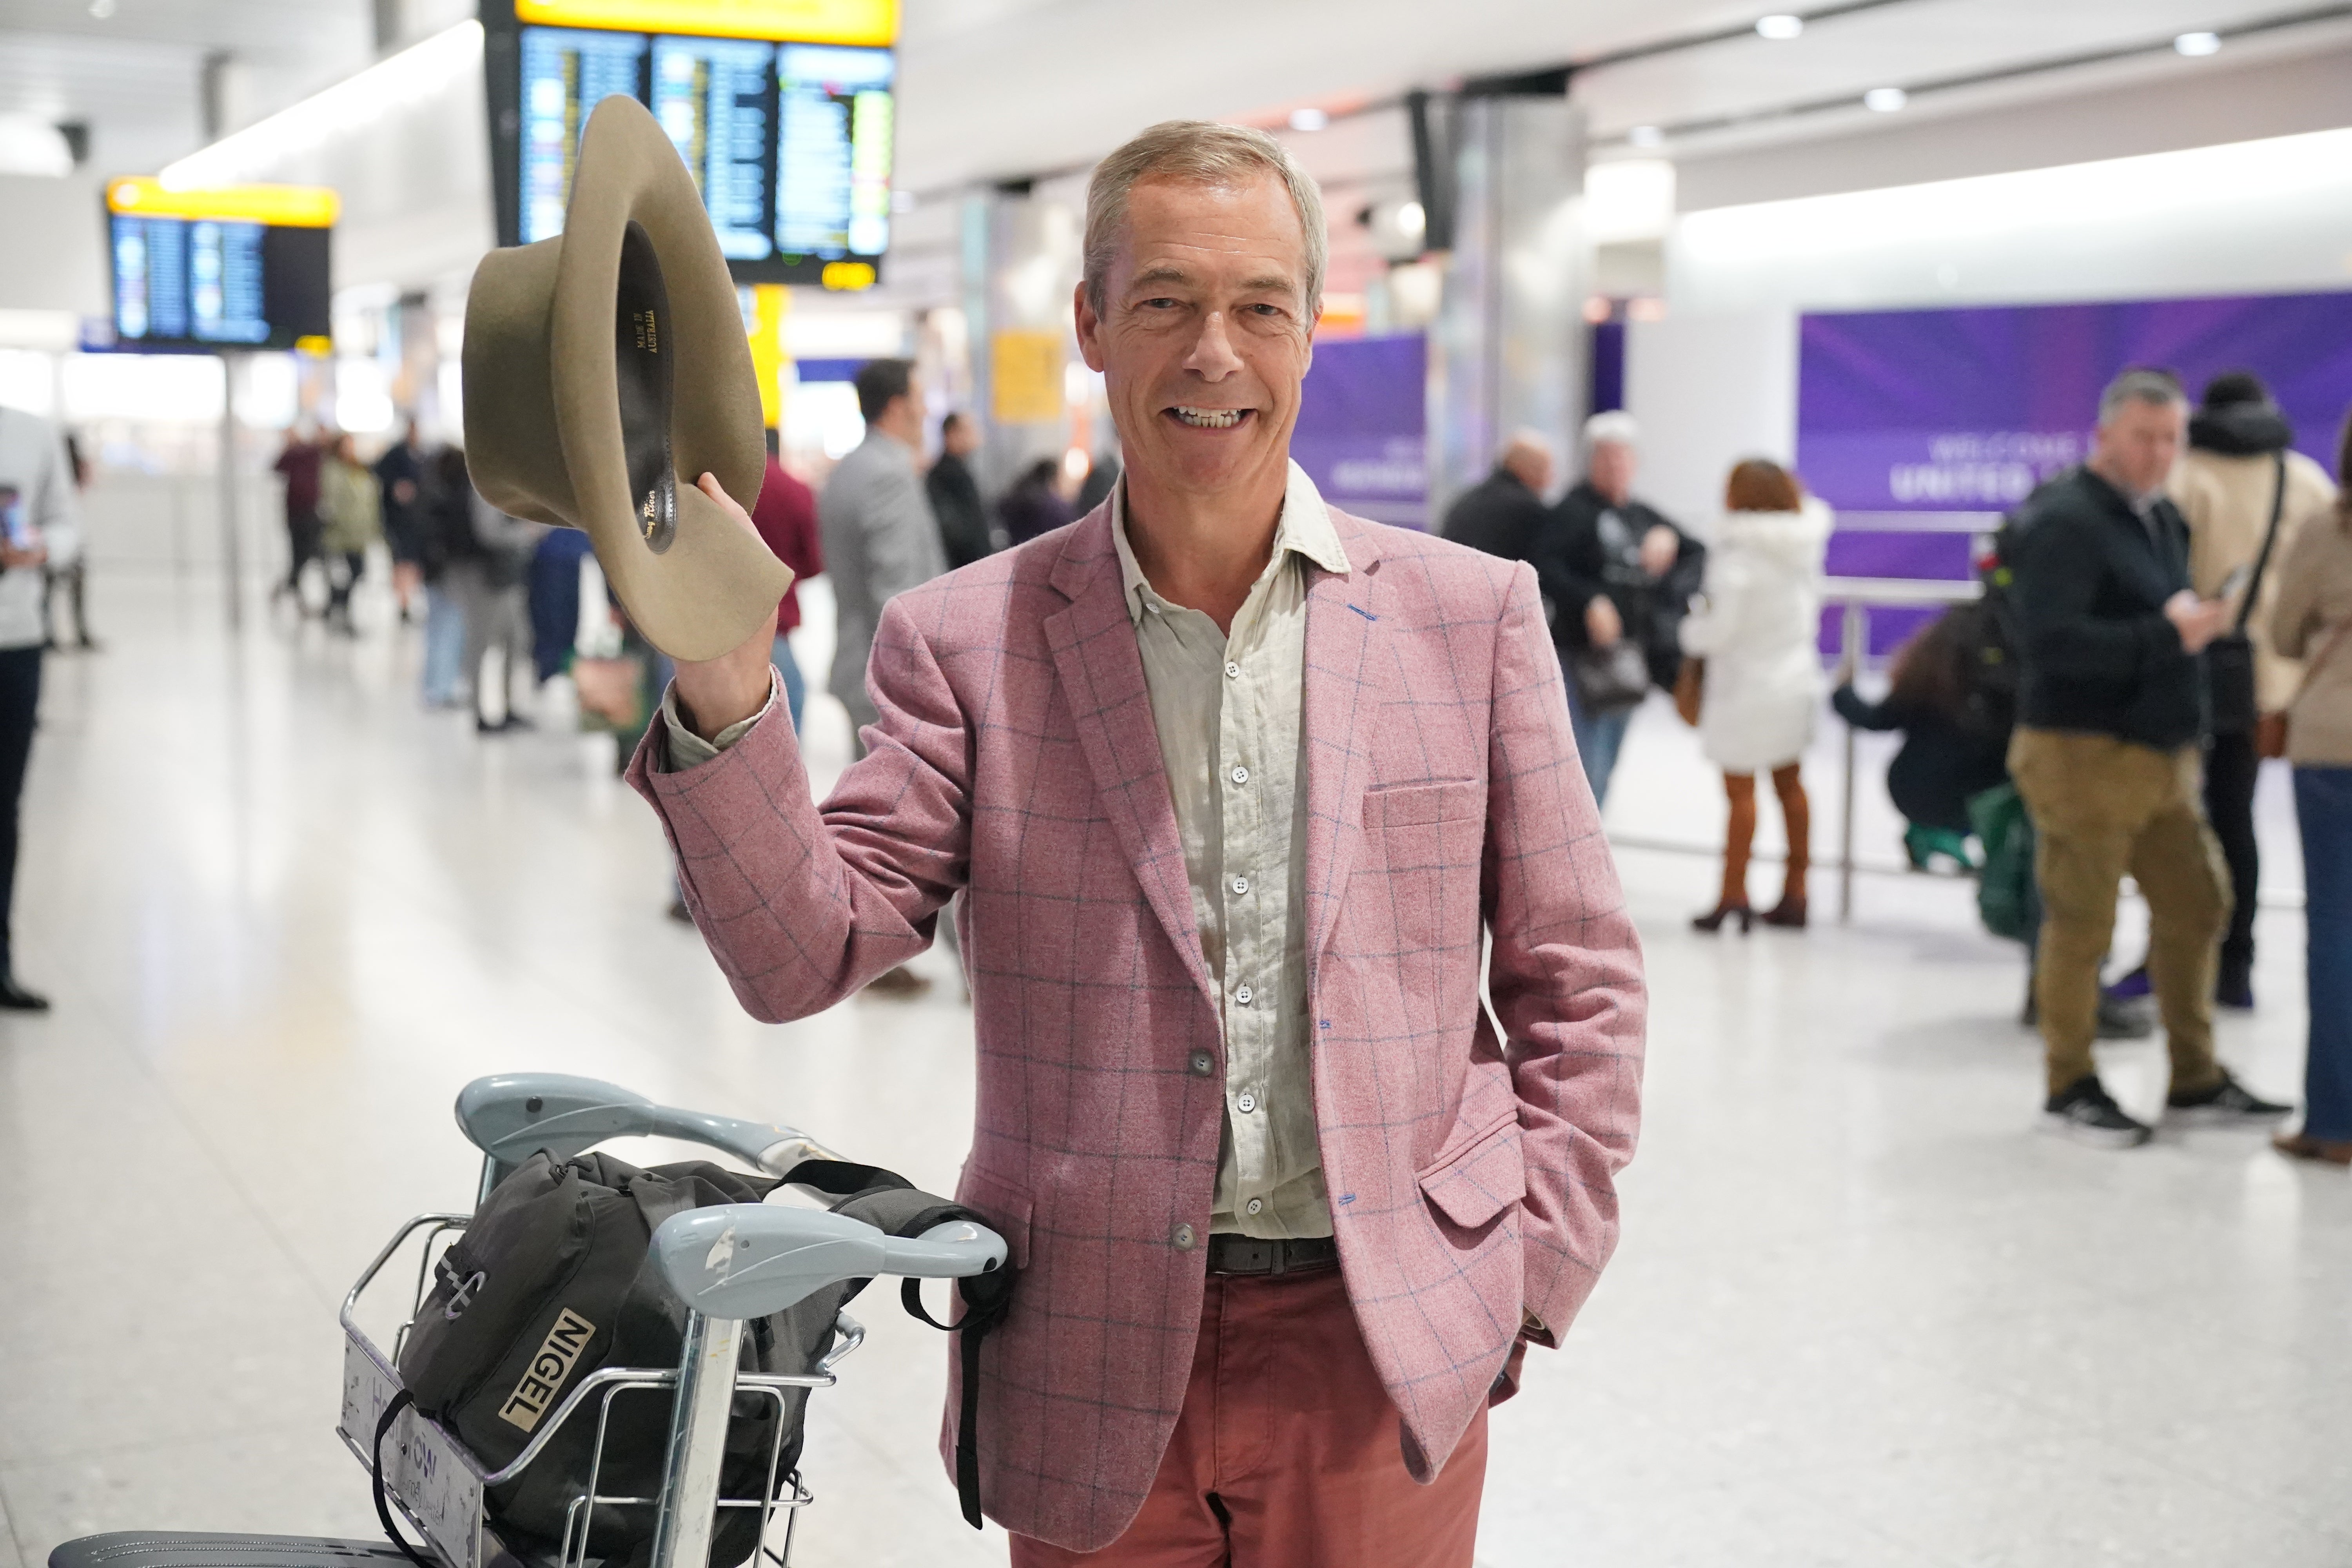 Nigel Farage returning from a stint on I’m a Celebrity... Get Me Out of Here